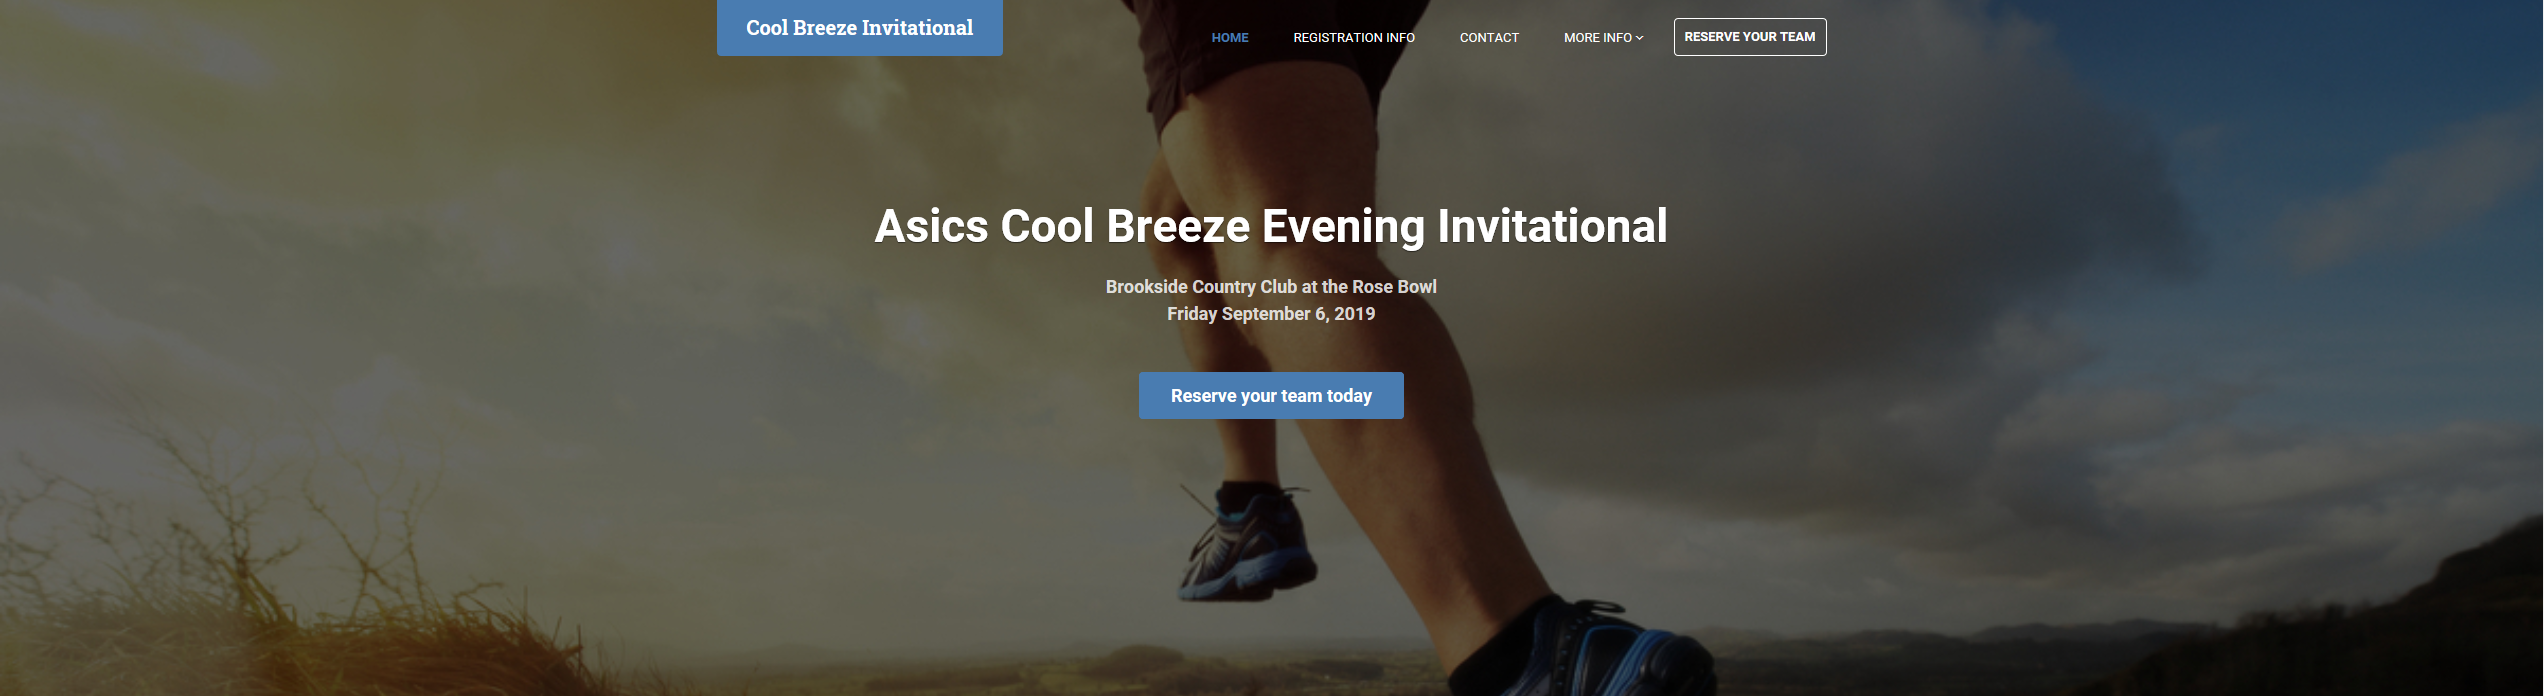 2019-09-06 - Page Banner - Cool Breeze Invitational